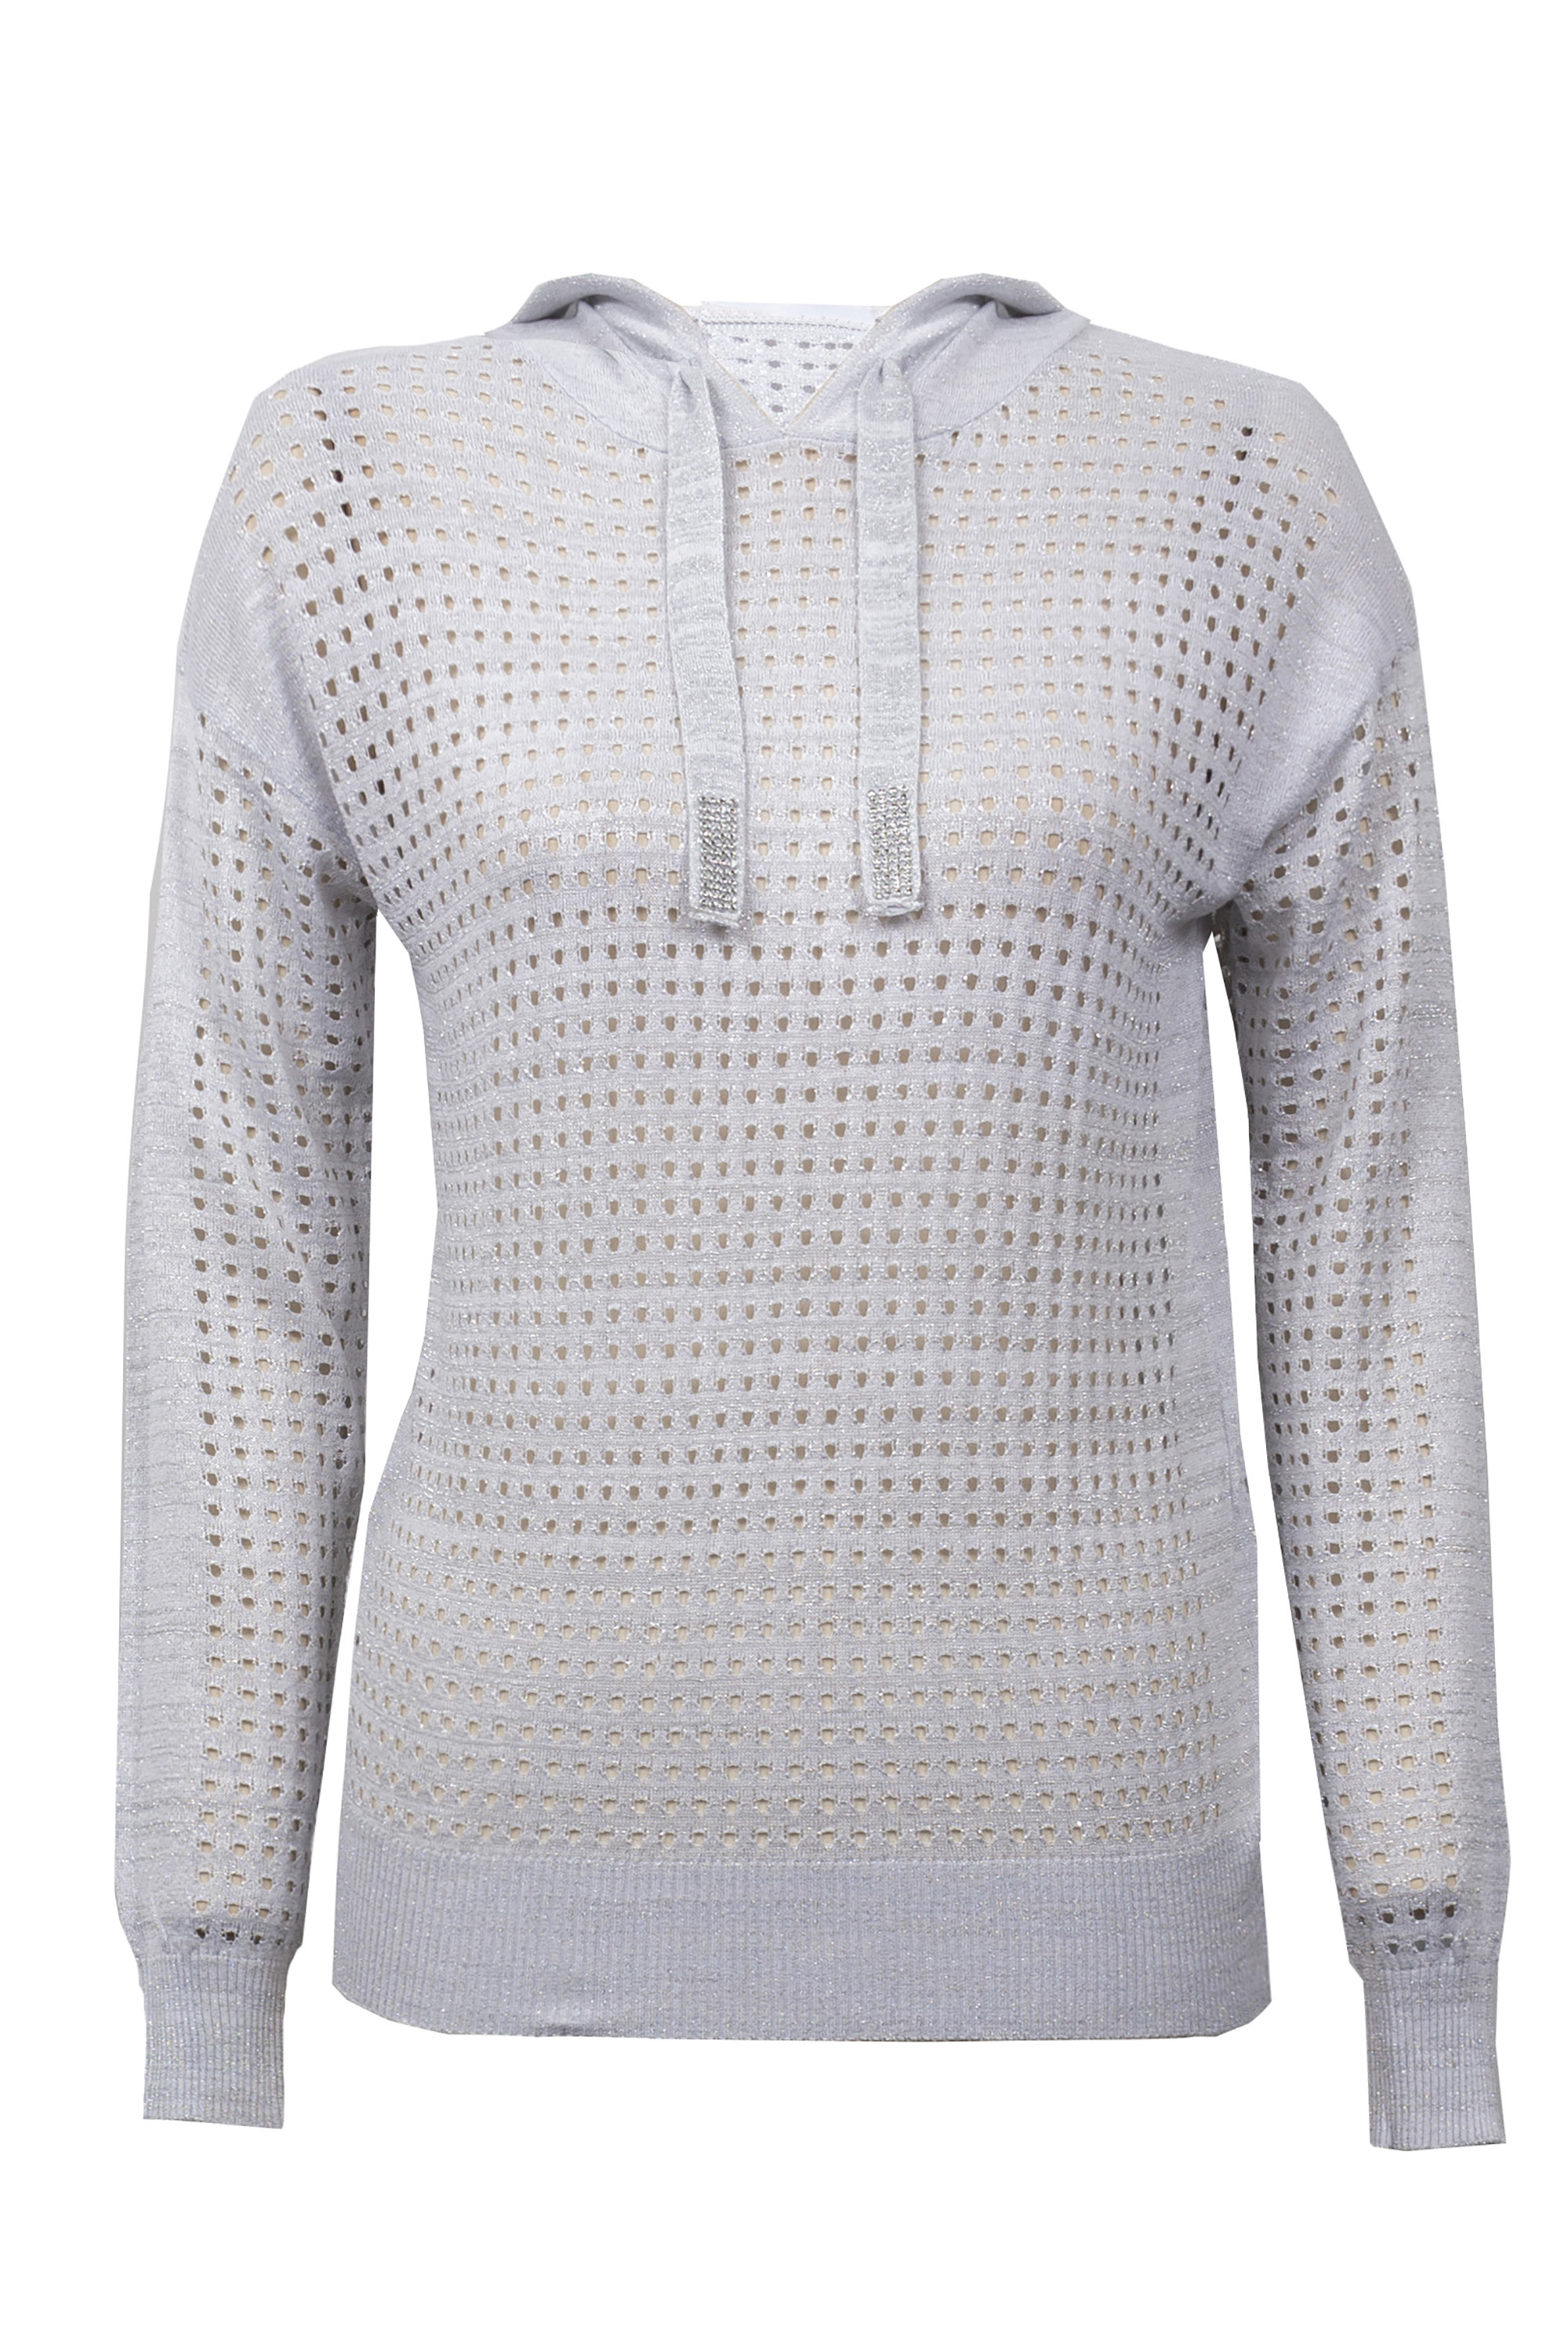 Women's Energy Silver Hoodie  Translucent Mesh Material - Bold&Grit